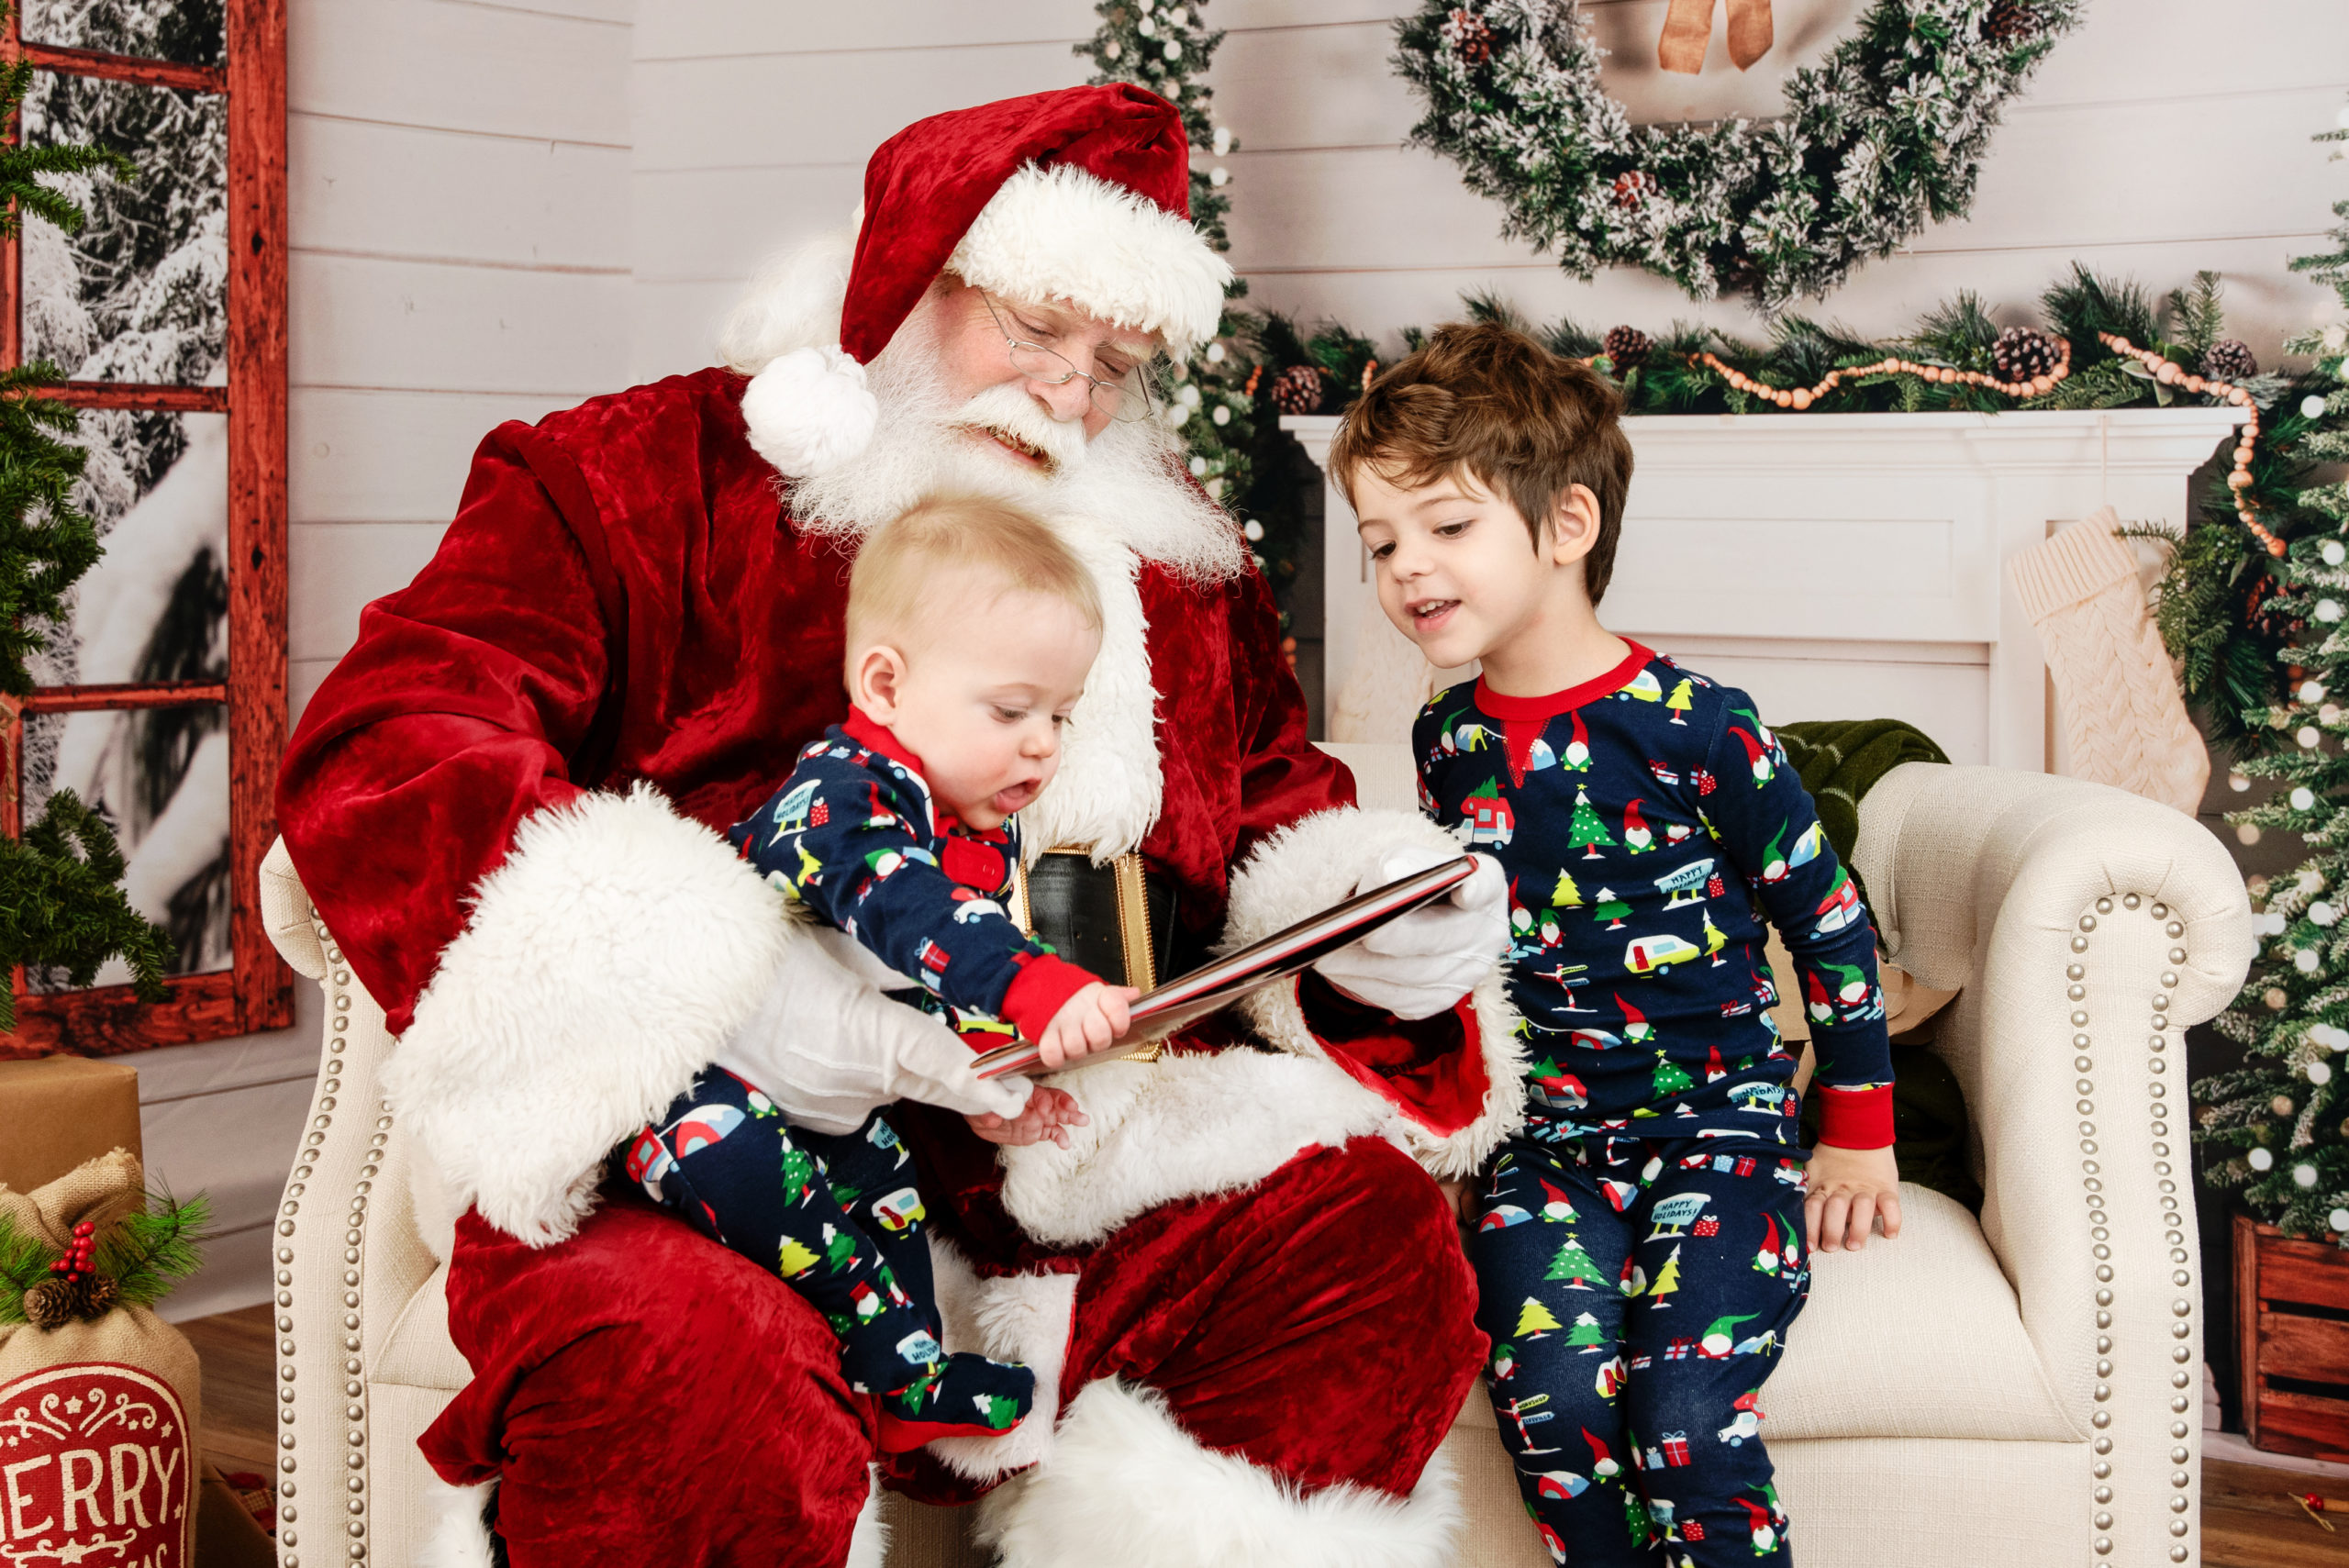 st-louis-santa-experience-santa-sitting-on-couch-with-two-boys-in-pajamas-opening-a-present